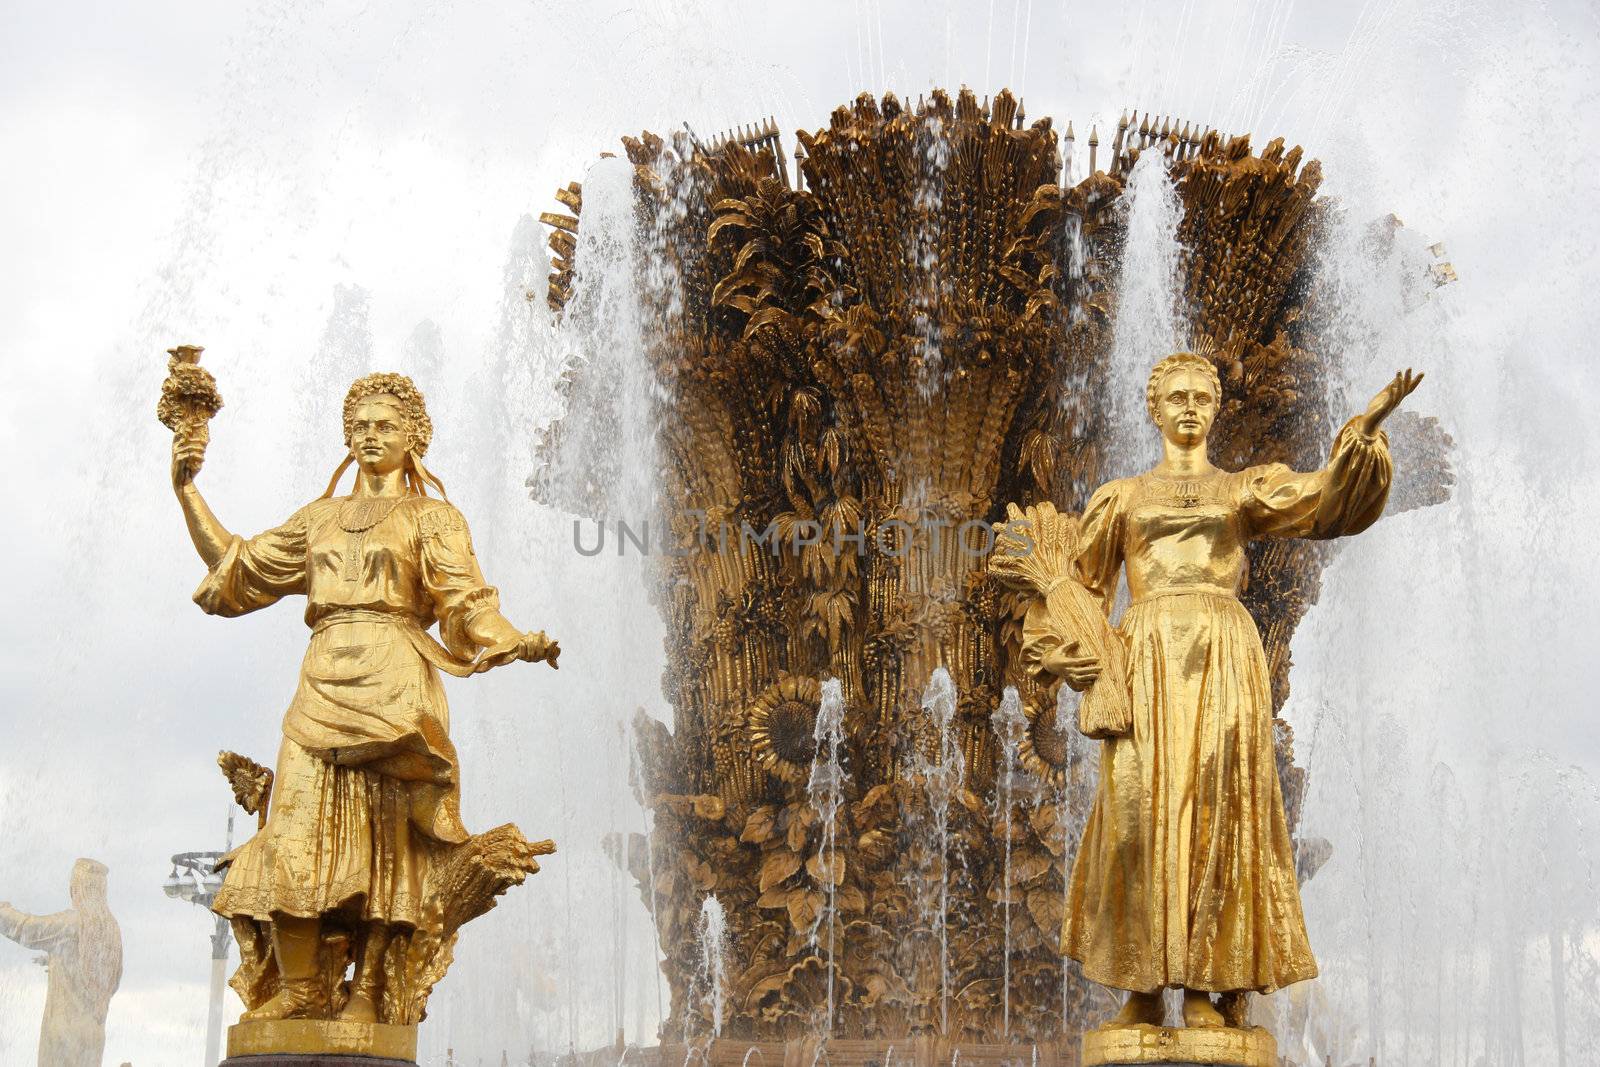 Famous Fountain The Friendship of Nations at All-Russia Exhibition Centre in Moscow, Russia